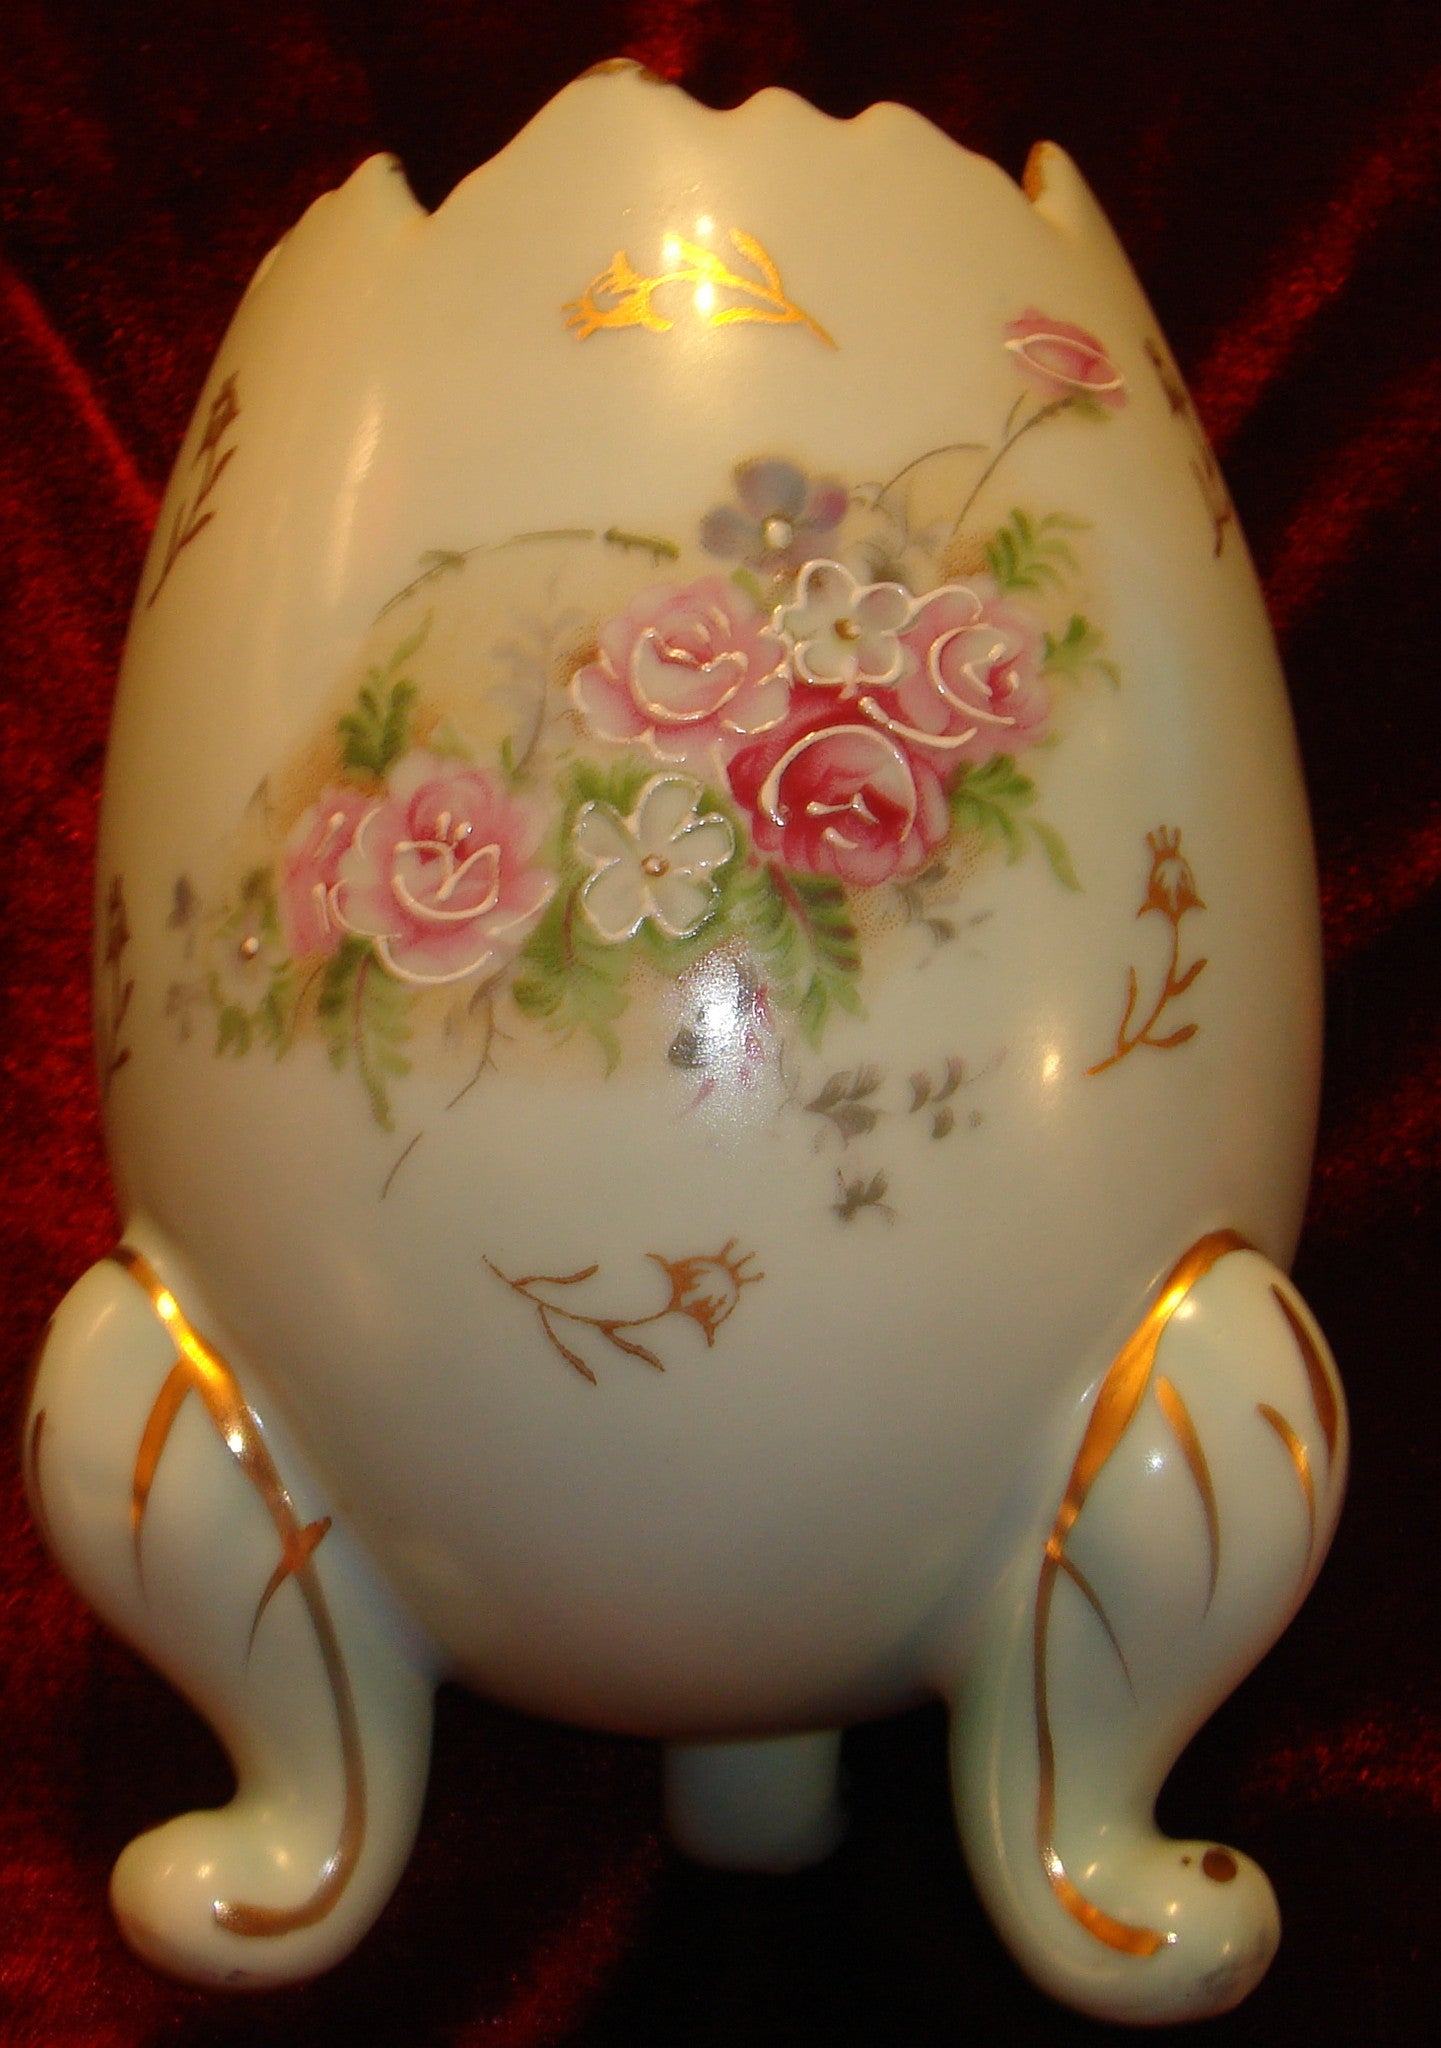 Inarco - Porcelain - Hand painted - Gilded - Beautiful - Vintage - Footed Egg Vase!